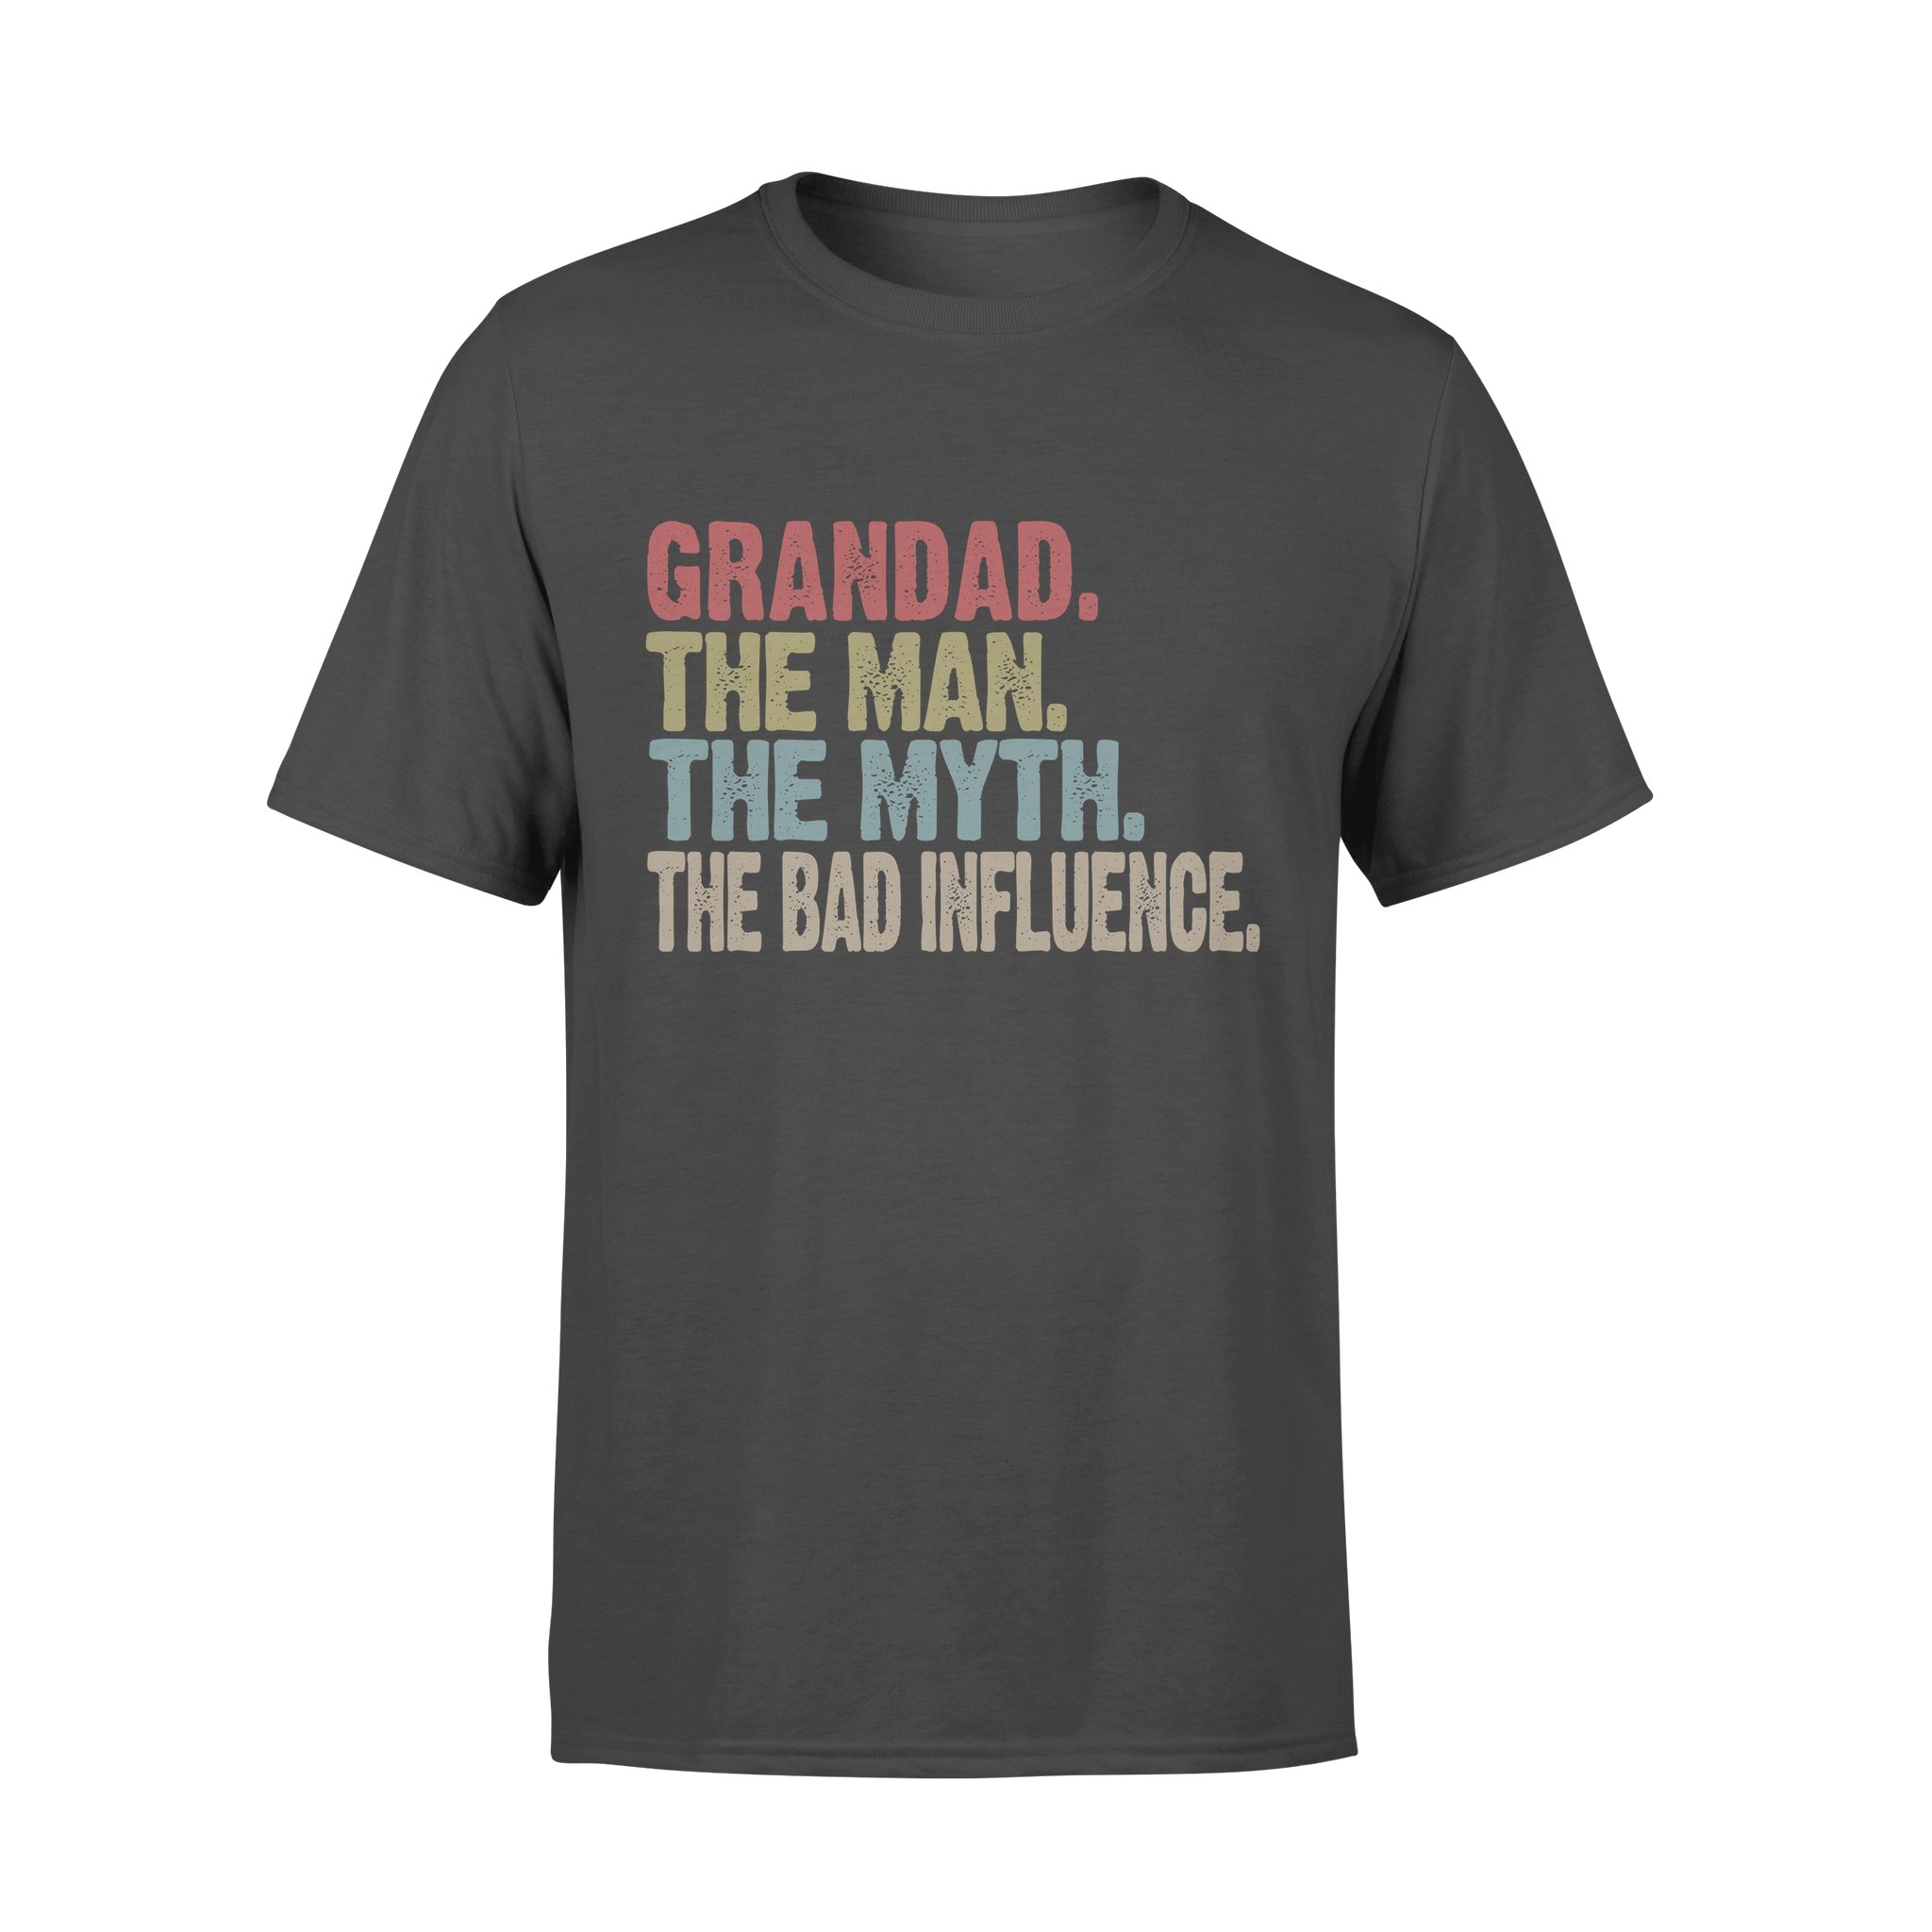 GRANDDAD. THE MAN. THE MYTH. THE BAD INFLUENCE, GIFTS FOR GRANDPA,GRANDPA SHIRT,GRANDPA GIFTS,FATHER?S DAY GIFT,PLUS SIZE SHIRT